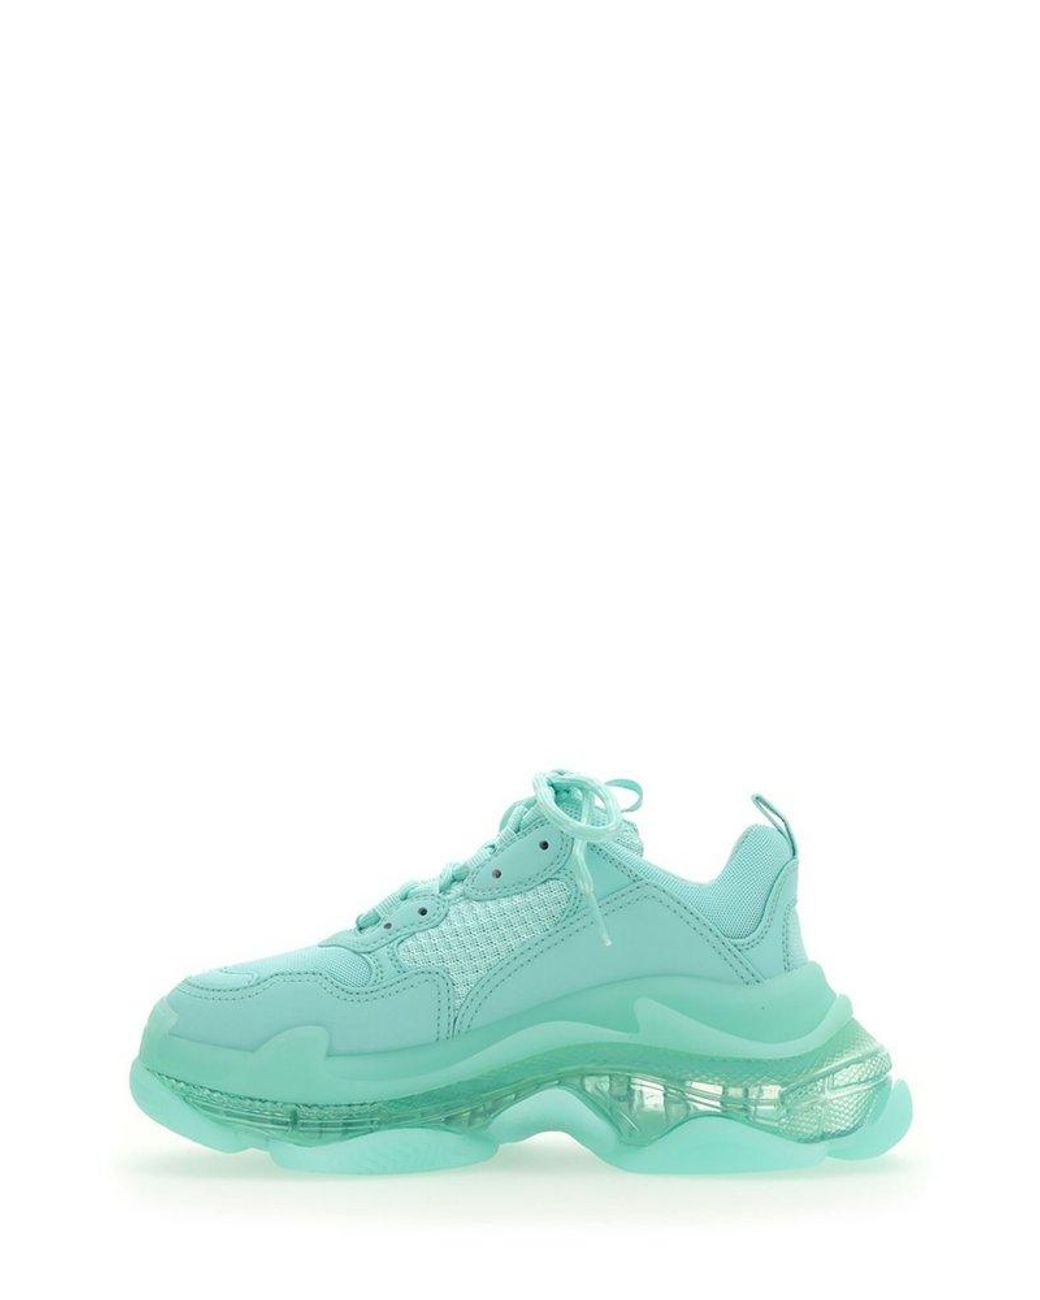 Balenciaga Triple S Lace-up Chunky Sneakers in Green | Lyst